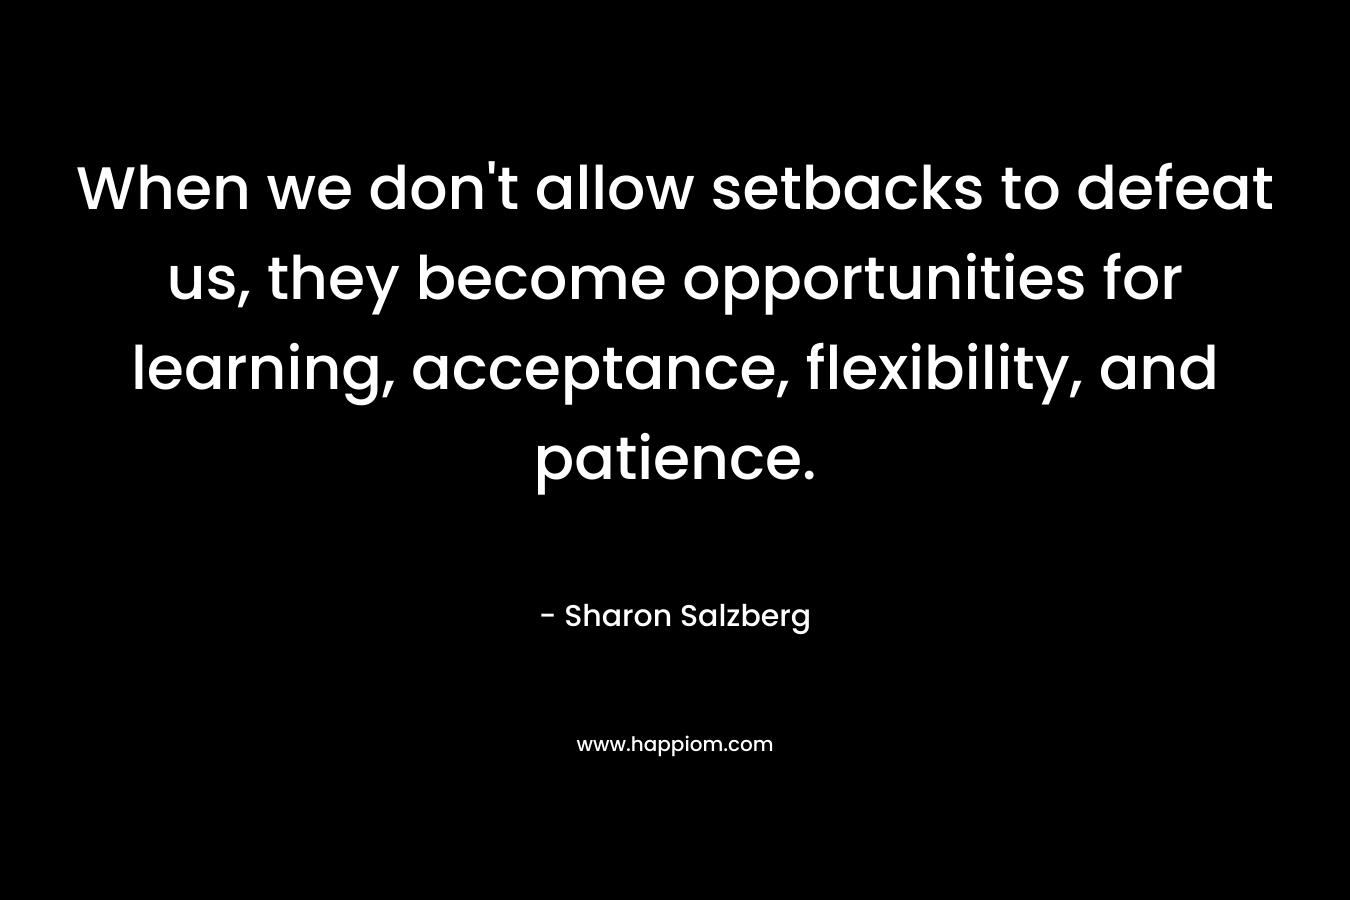 When we don't allow setbacks to defeat us, they become opportunities for learning, acceptance, flexibility, and patience.